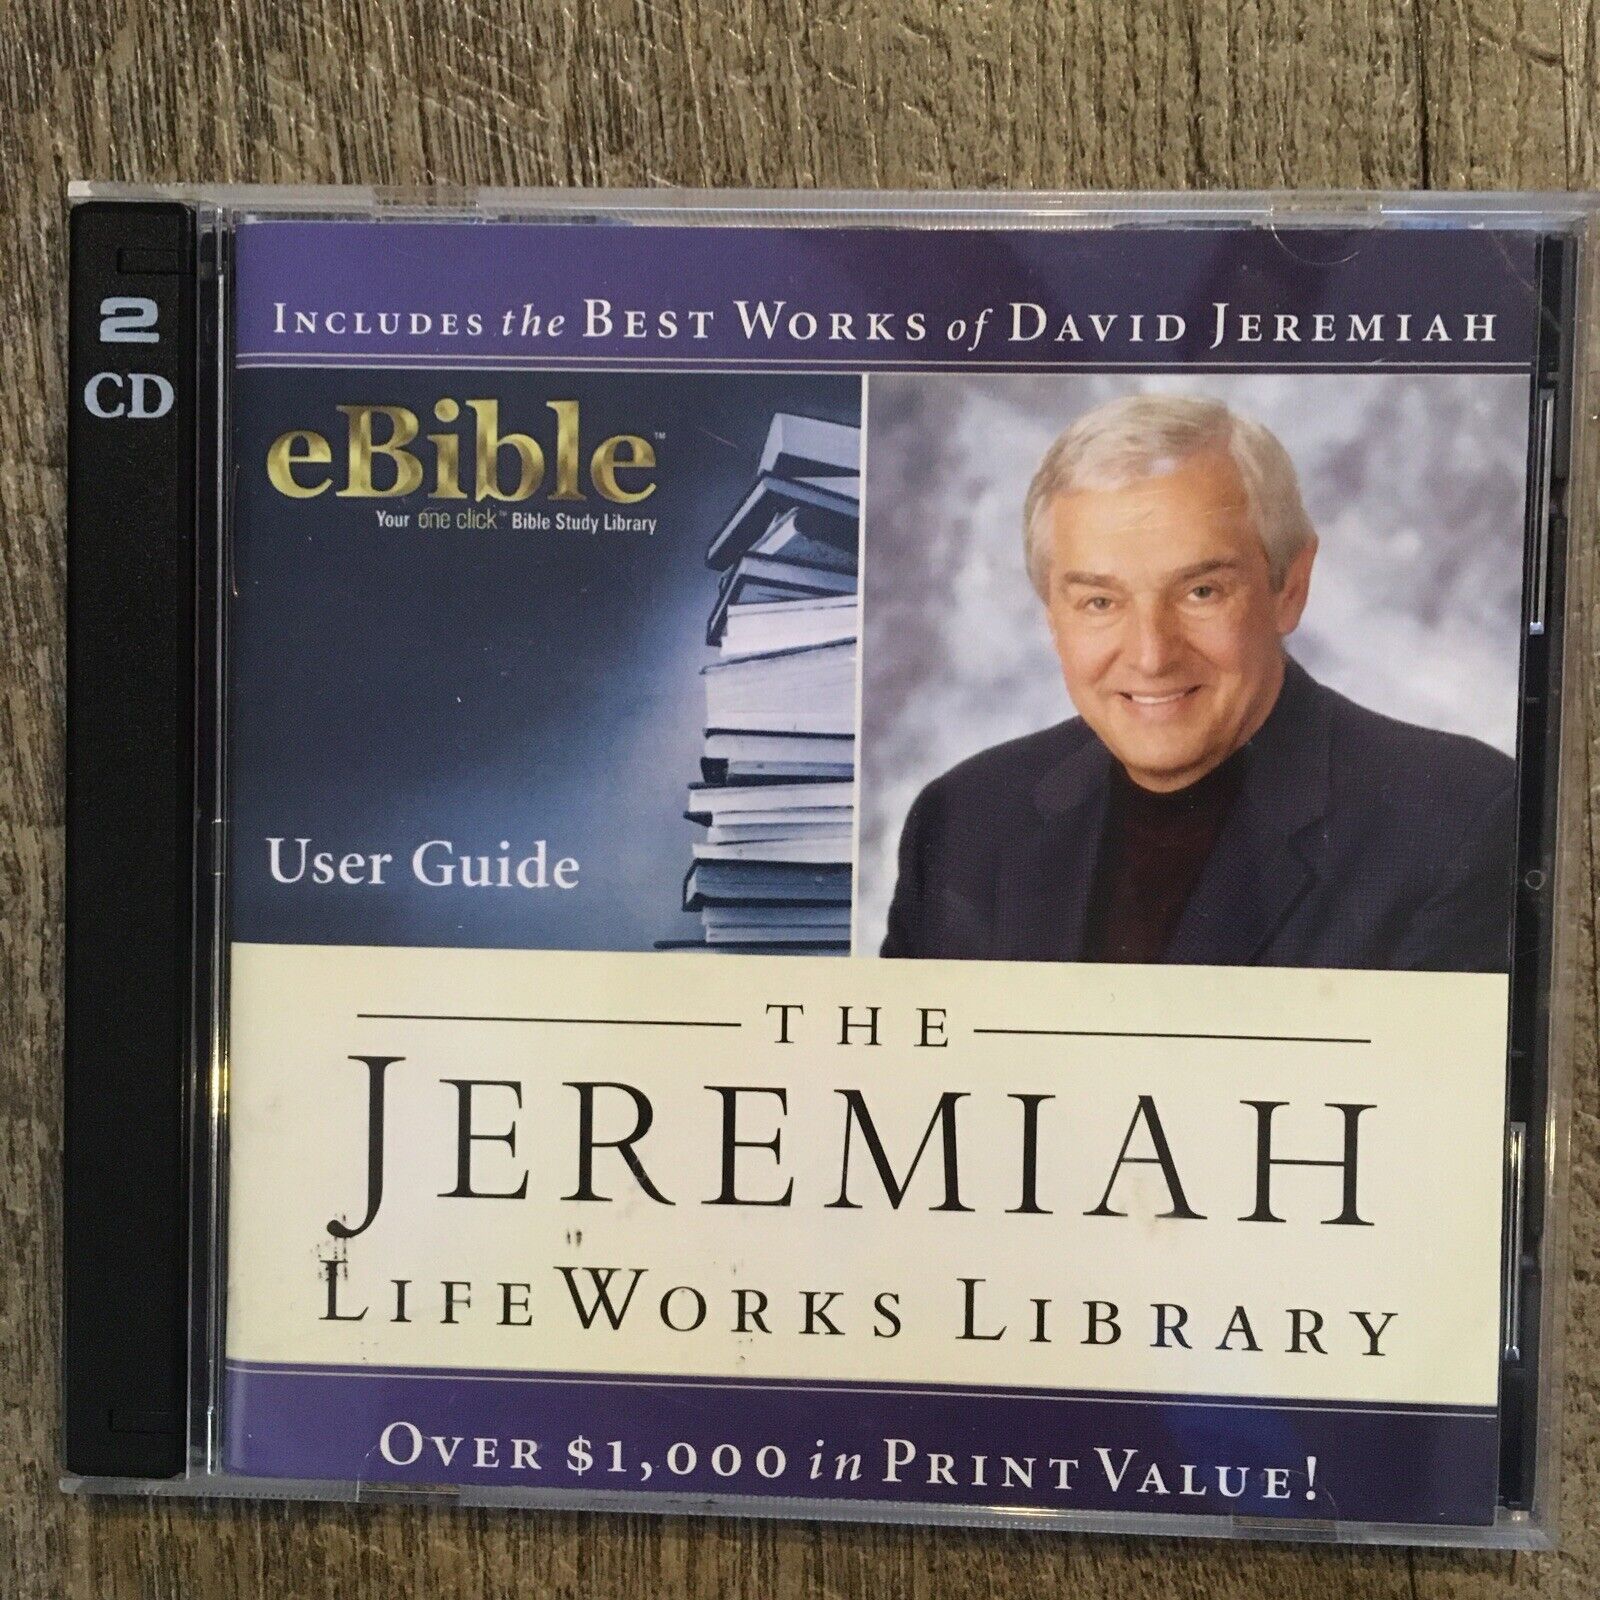 The Jeremiah Life Works Library: Best Works Of David Jeremiah eBible 2 CD 2004